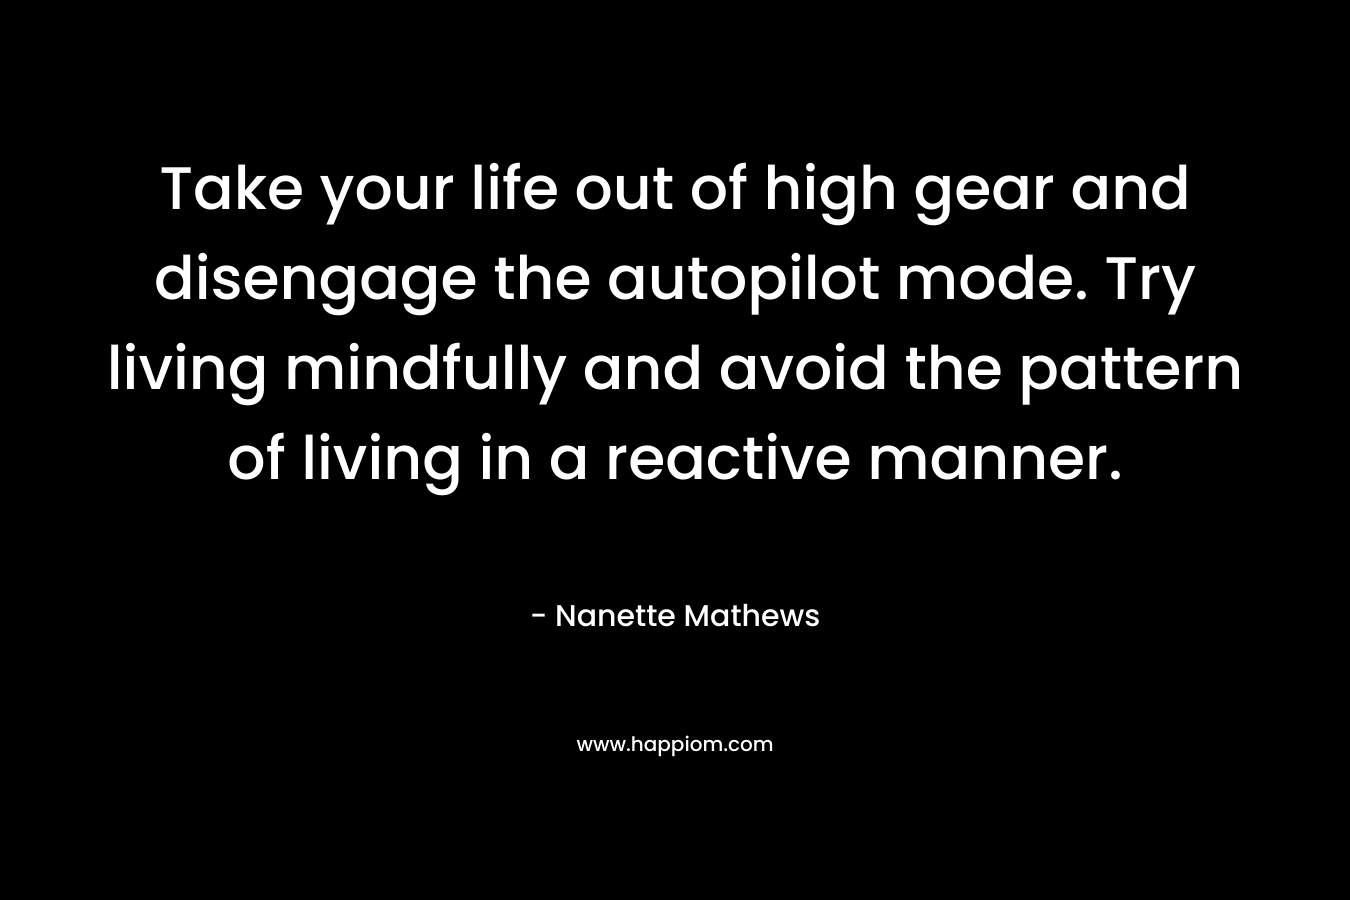 Take your life out of high gear and disengage the autopilot mode. Try living mindfully and avoid the pattern of living in a reactive manner. – Nanette Mathews